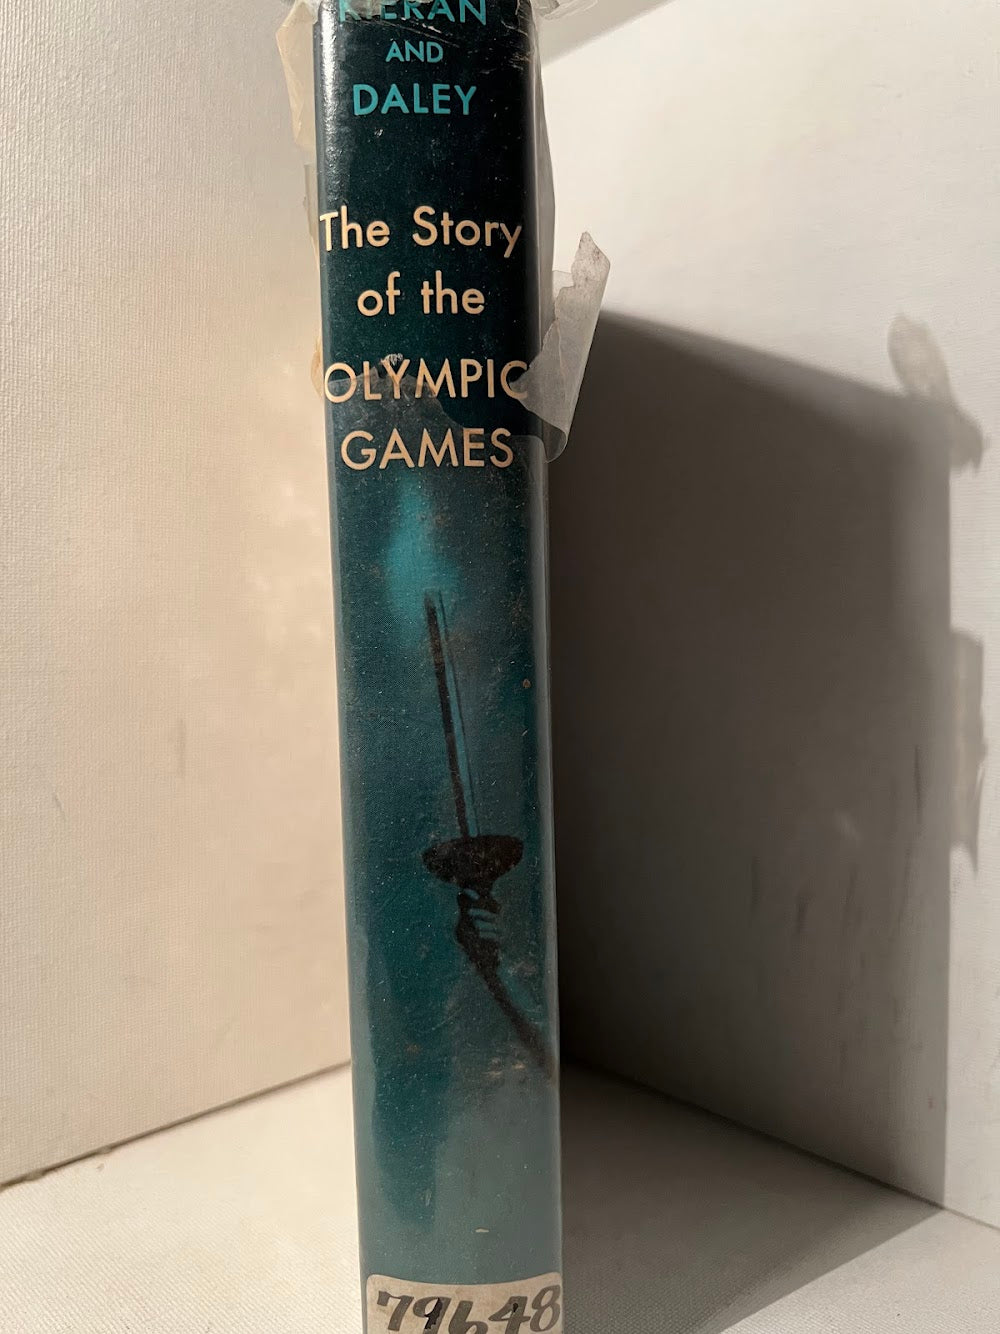 The Story of the Olympic Games 776 B.C. to 1964 by John Kieran and Arthur Daley